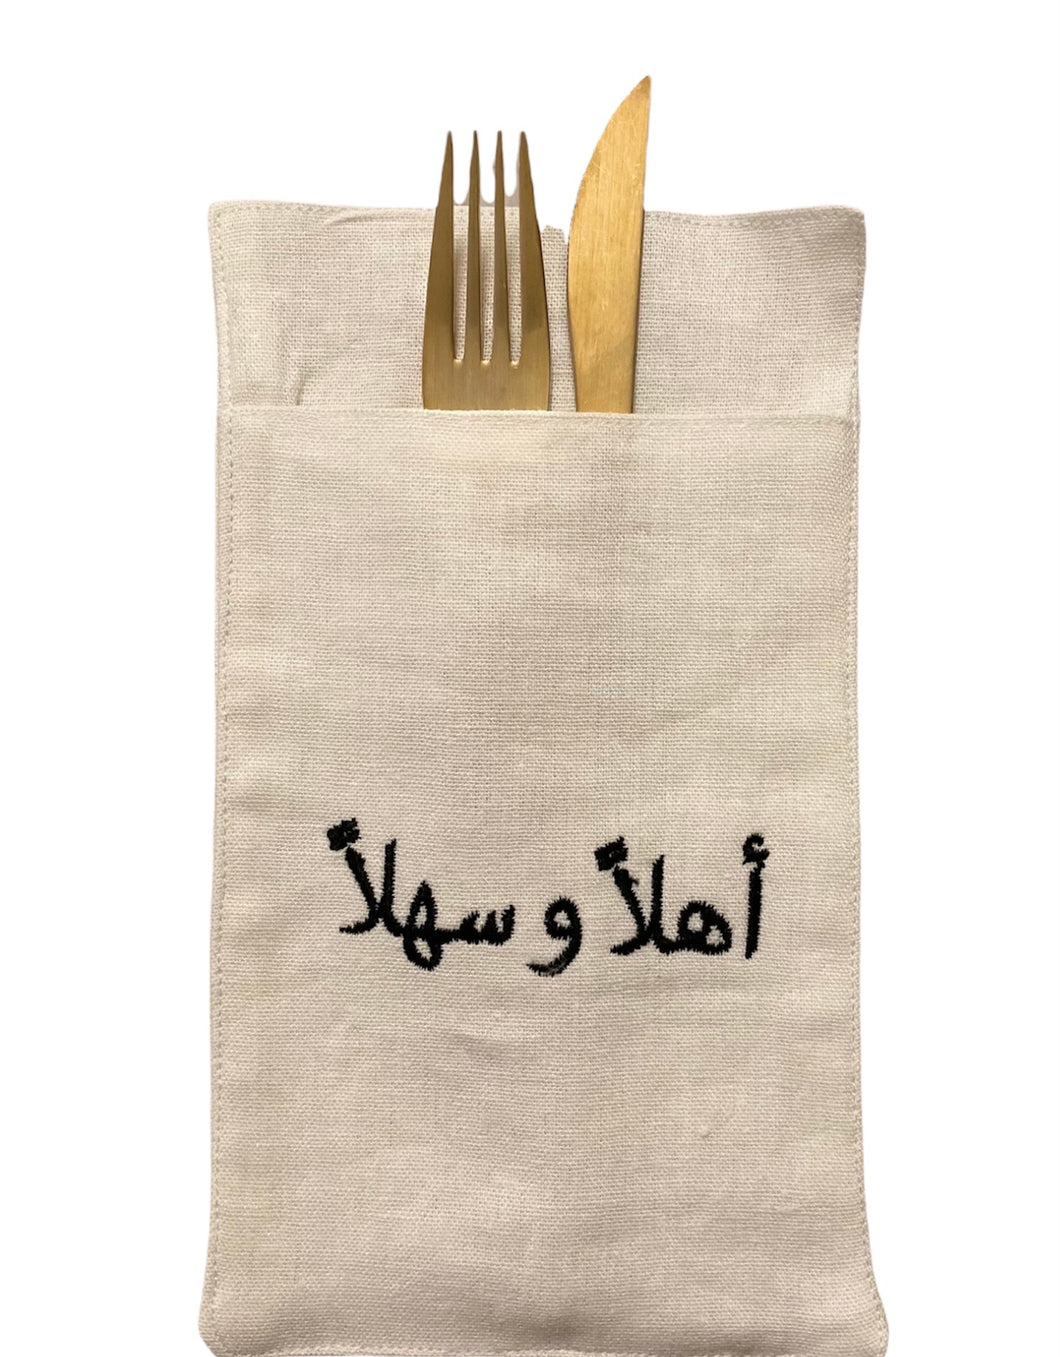 A Table Embroidered Cutlery Pouch - Ahlan Wa Sahlan